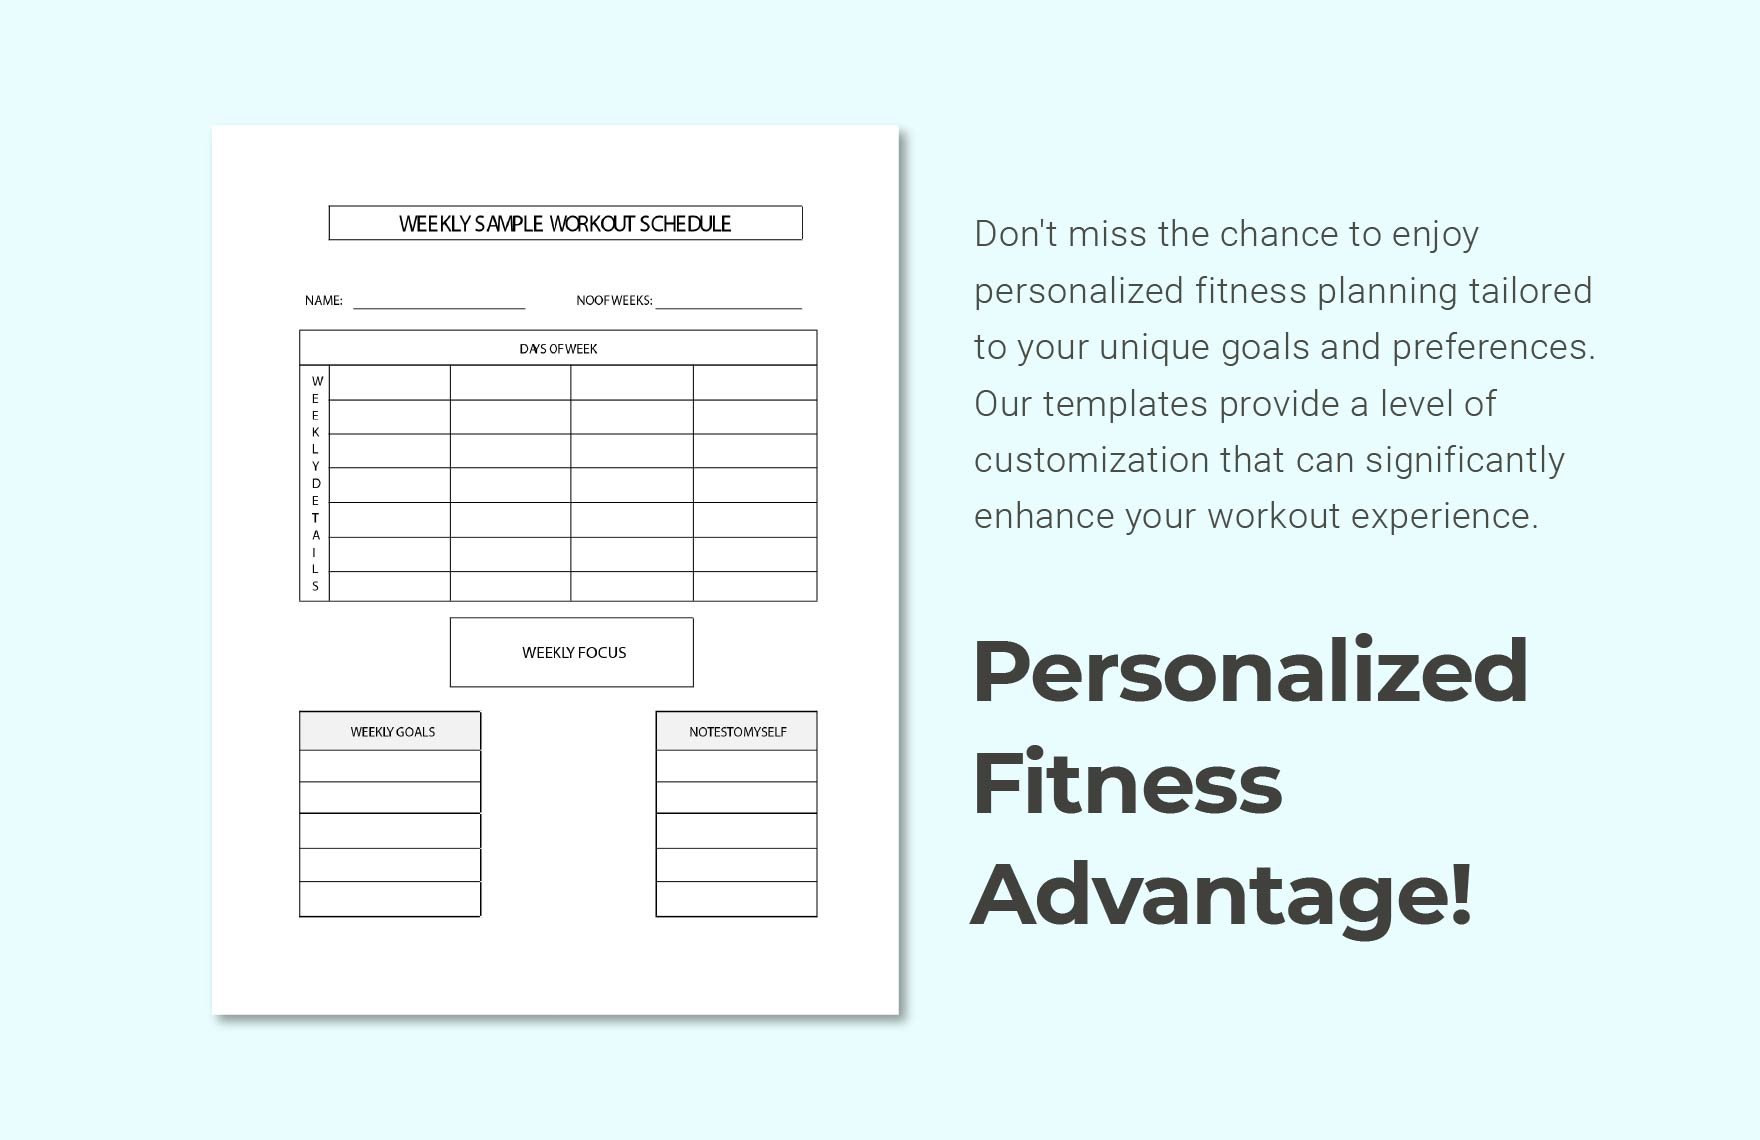 Weekly Sample Workout Schedule Template